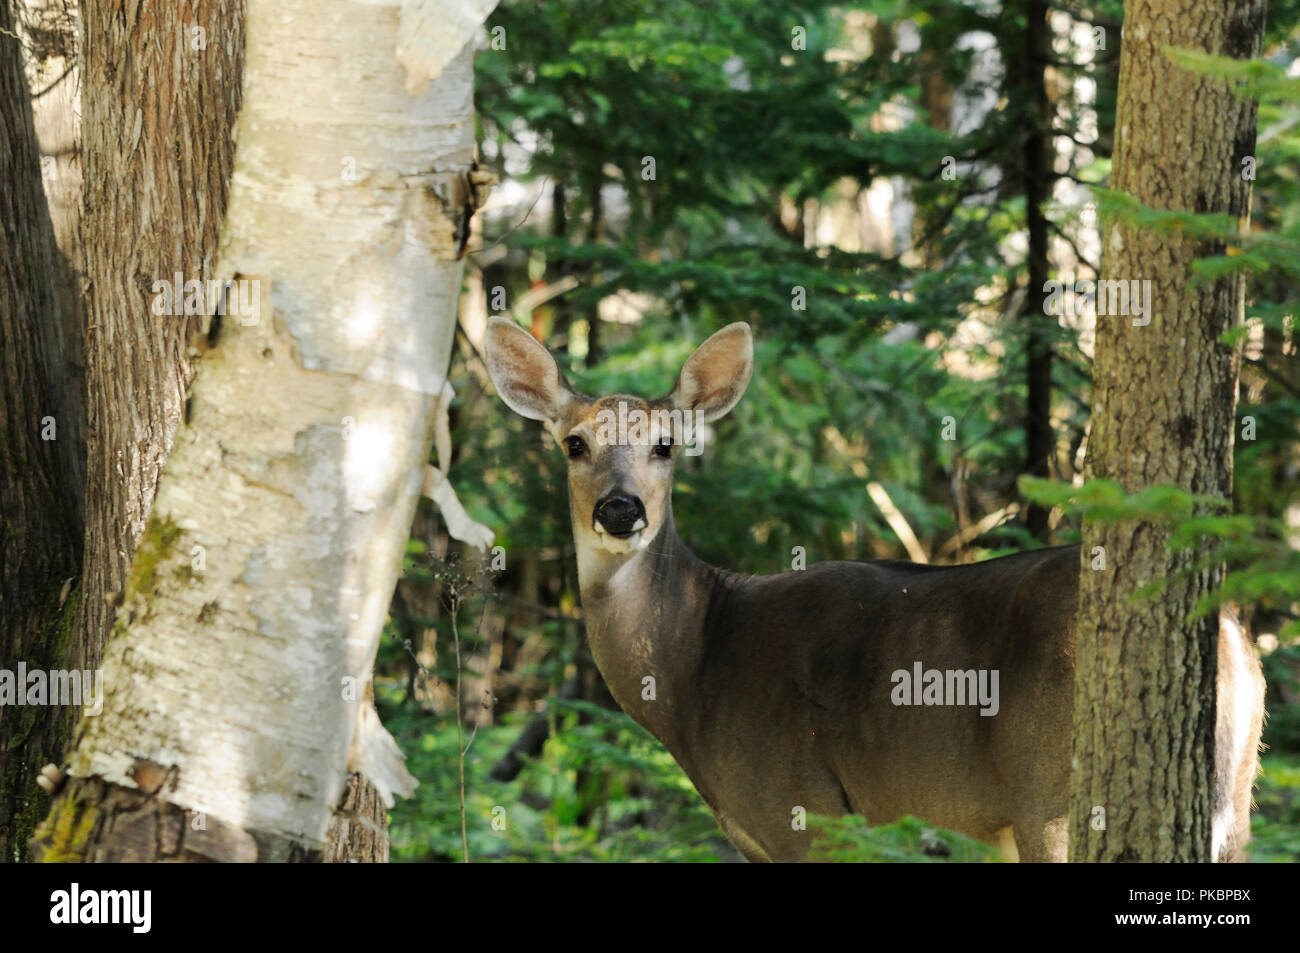 Deer animal close-up profile view displaying head, ears, eyes, nose, in its environment and surrounding with a bokeh foliage background and trees. Stock Photo